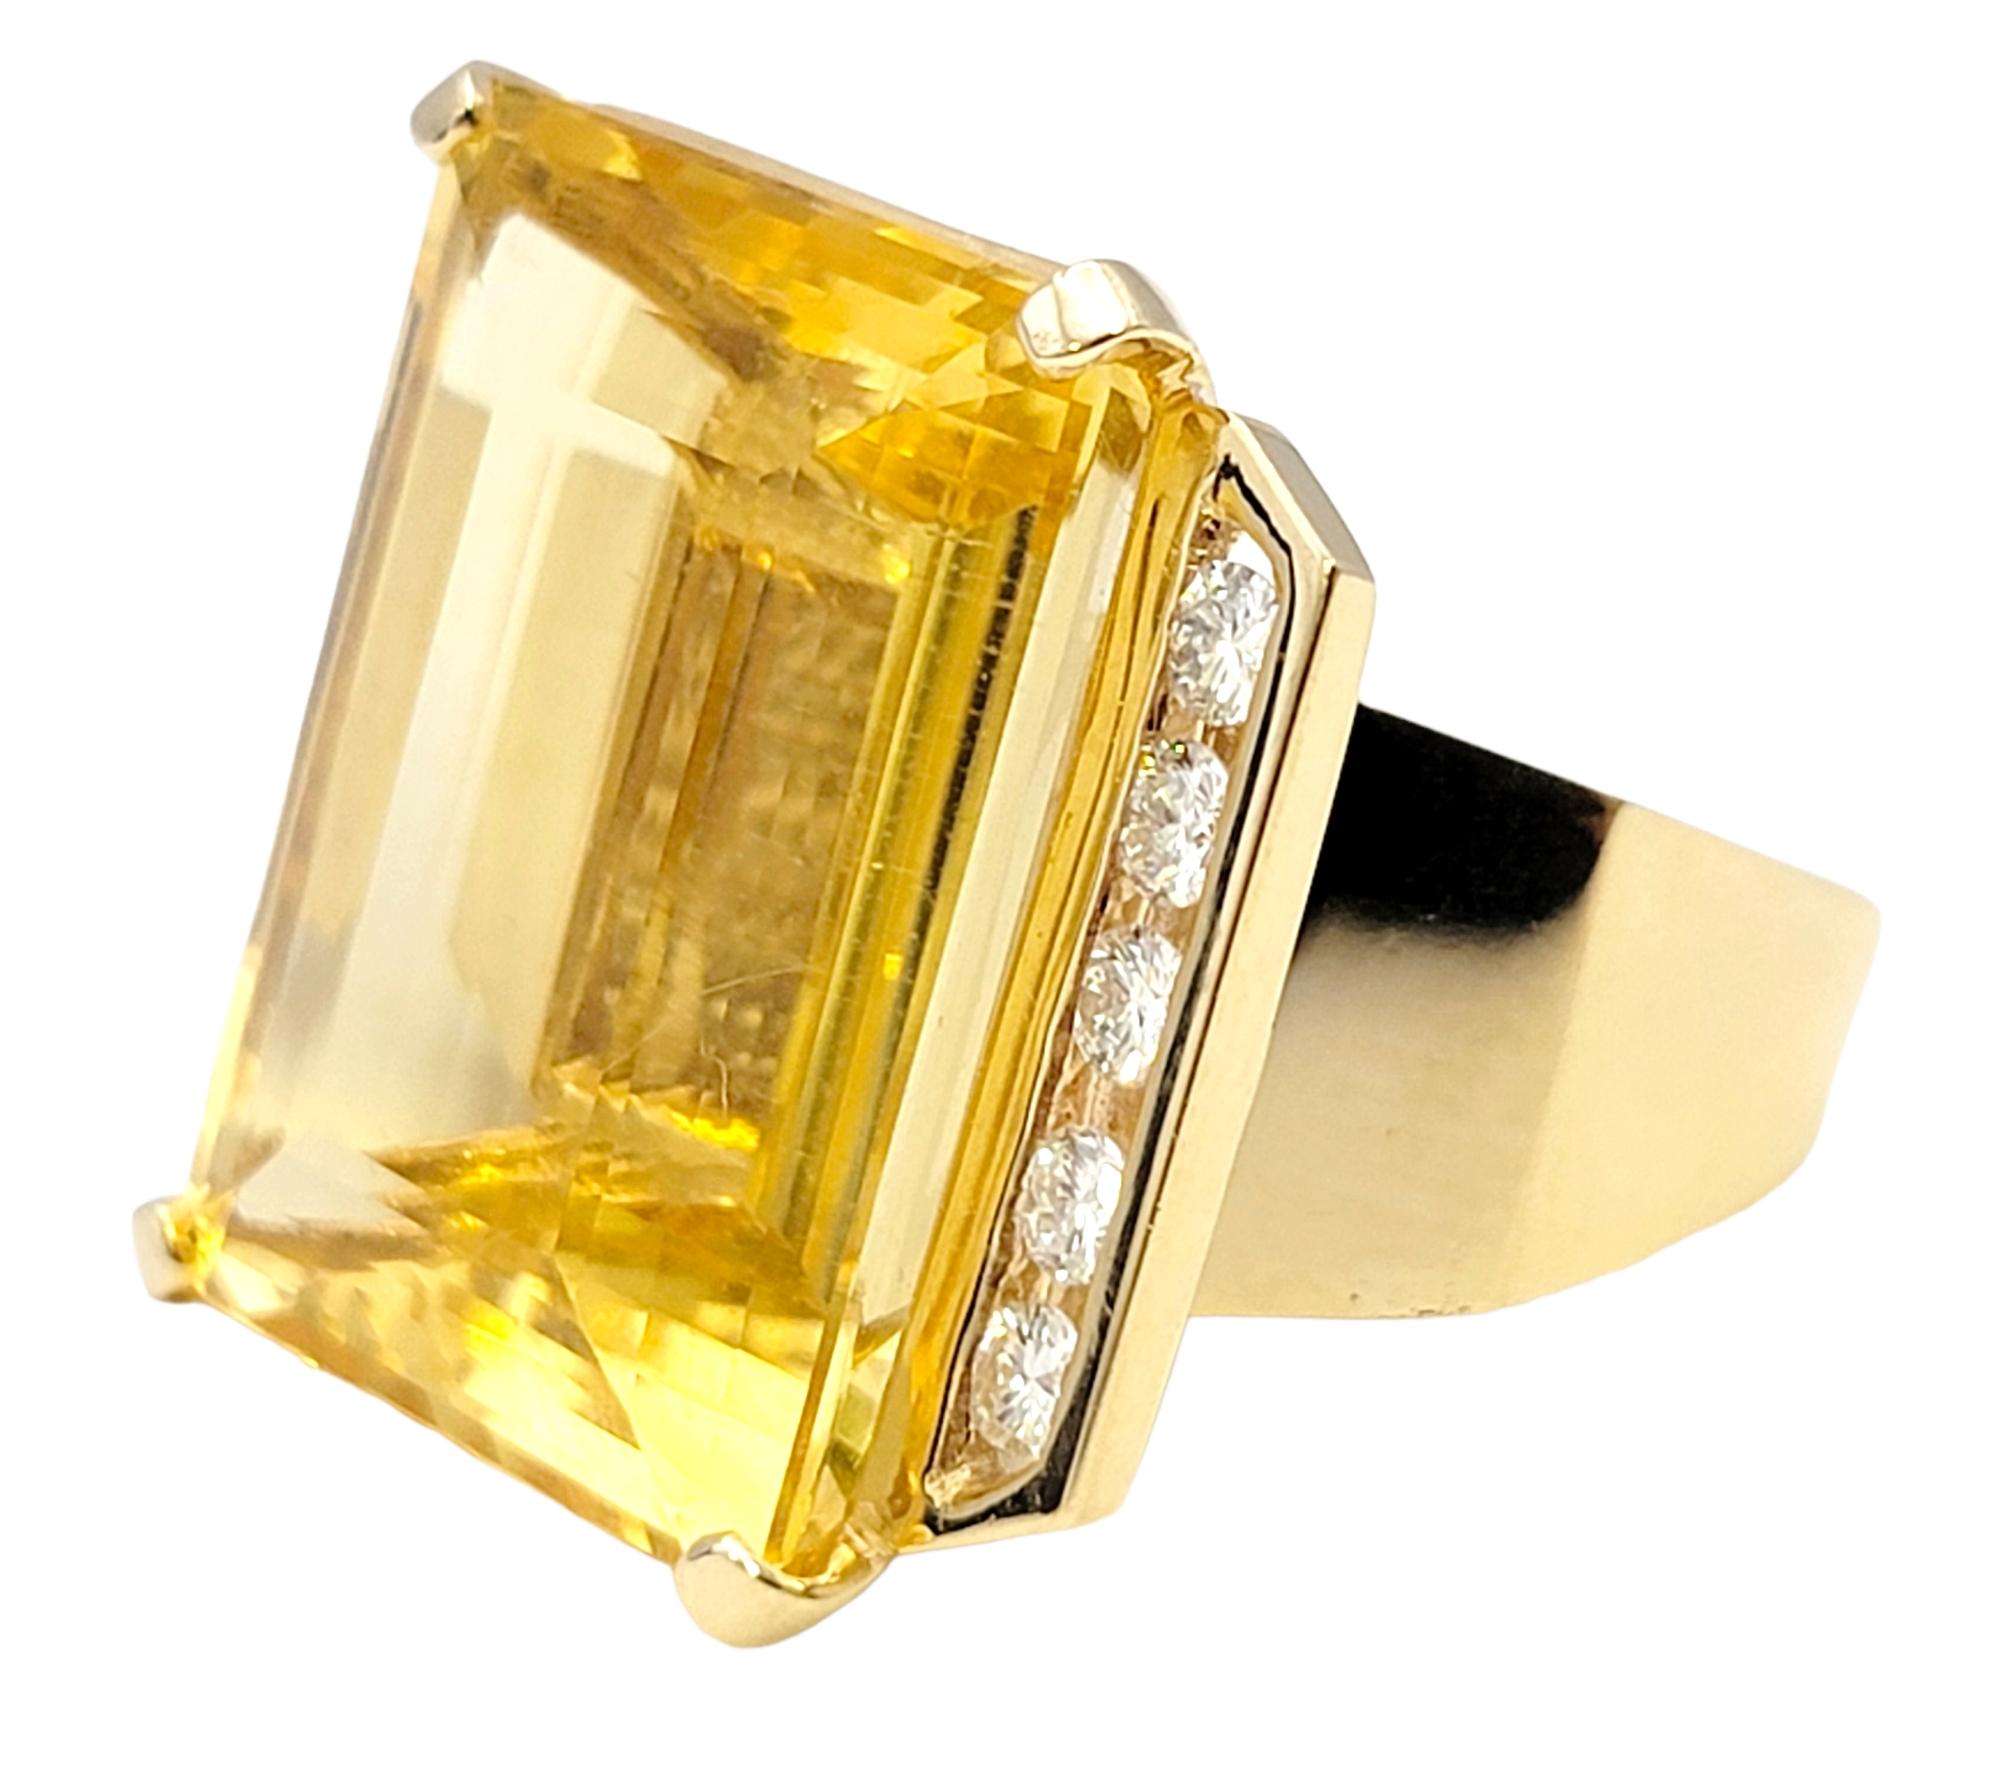 Huge 32.31 Carat Total Emerald Cut Citrine and Diamond Cocktail Ring Yellow Gold In Good Condition For Sale In Scottsdale, AZ